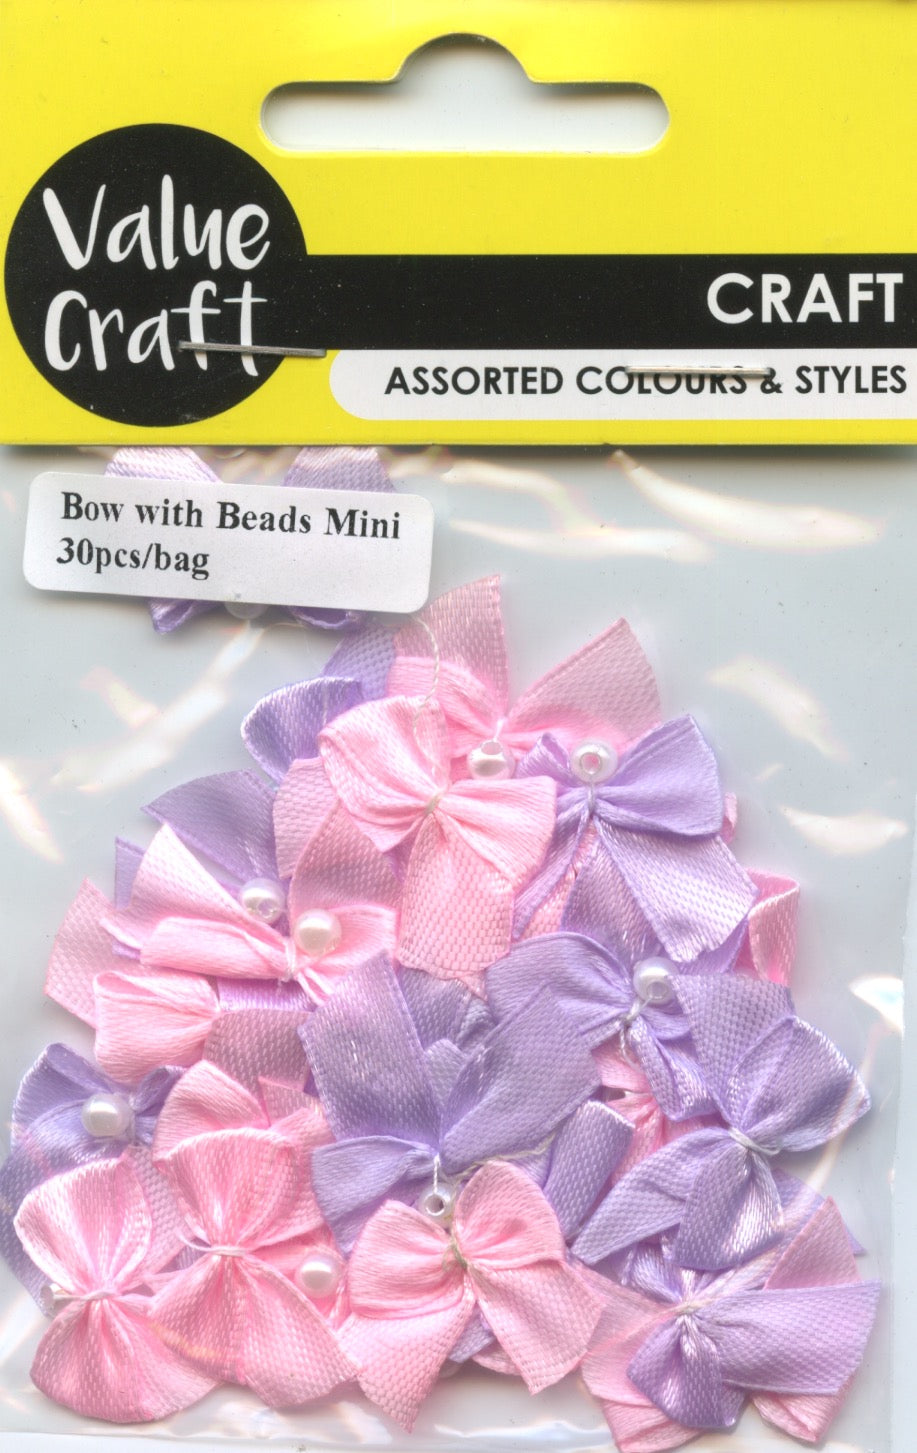 Bows with pearls - Pink and Mauve - 30 pack